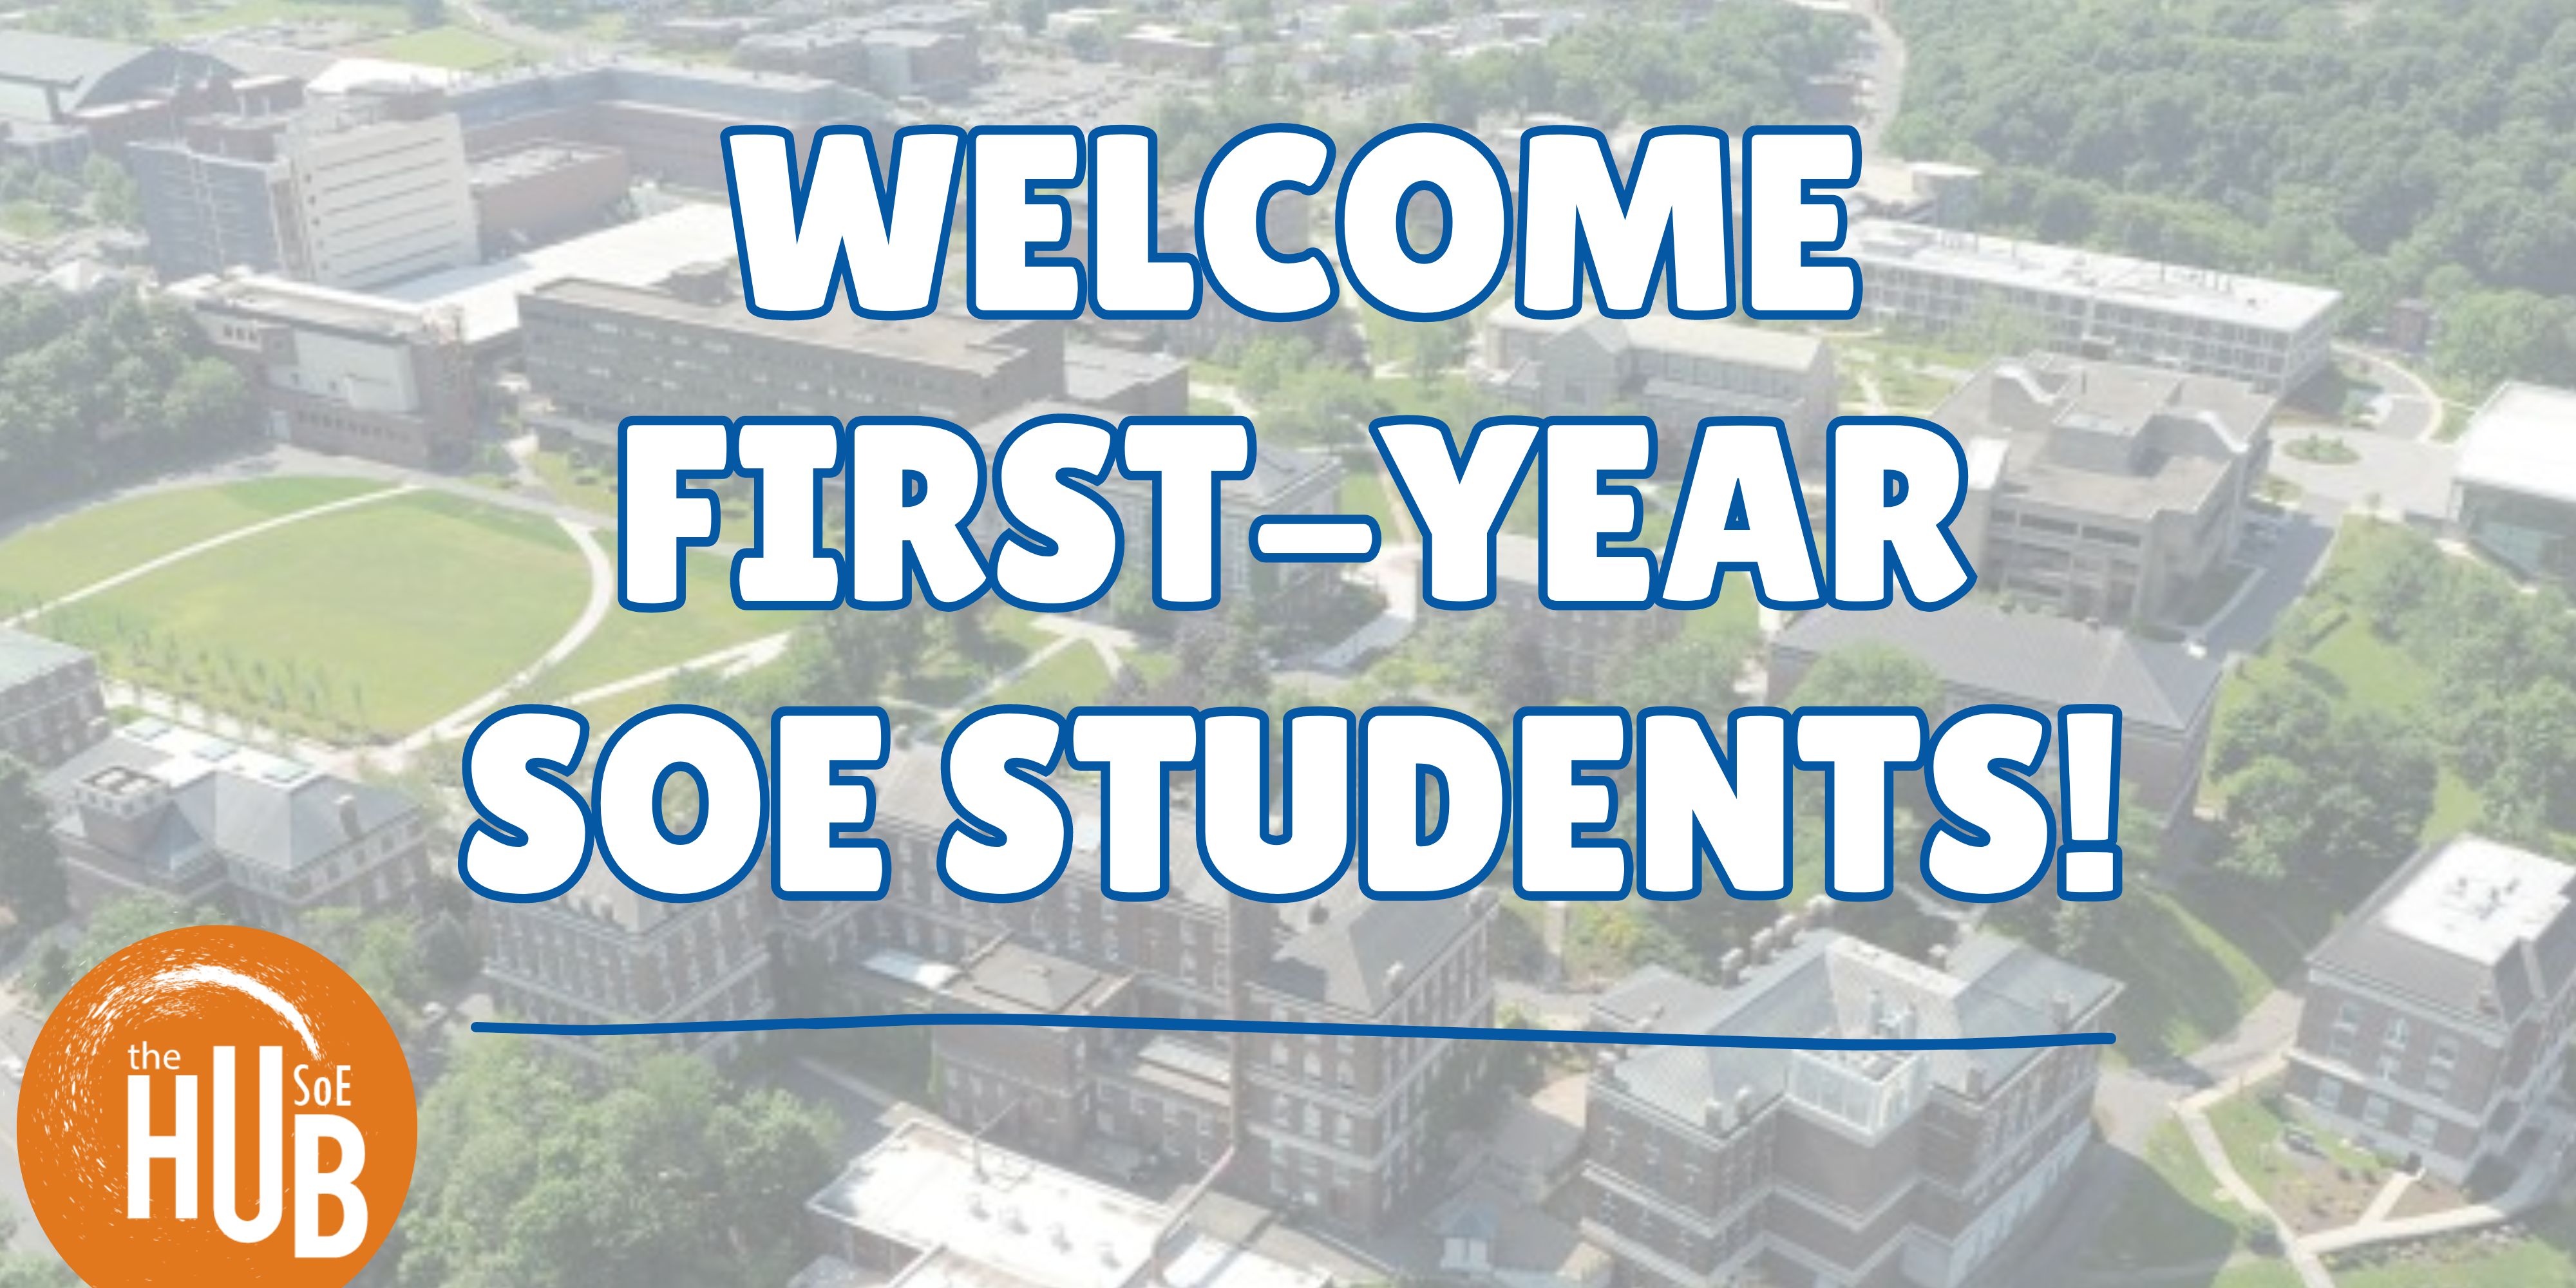 jpg image with test "Welcome First Year SoE Students". With the SOE HUB logo on the bottom left corner.